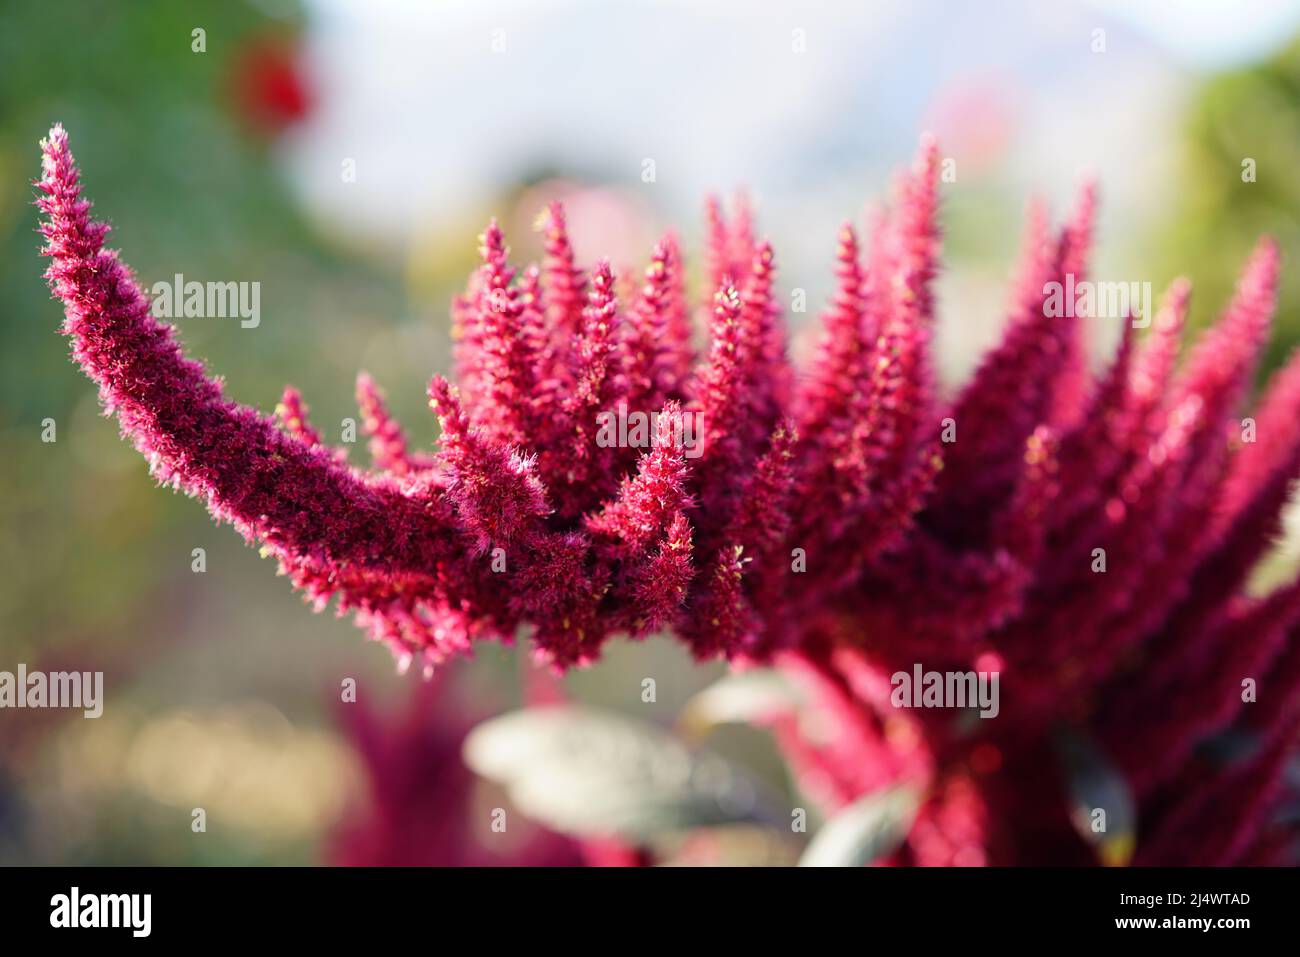 Pink blooming plant outside in a garden Stock Photo